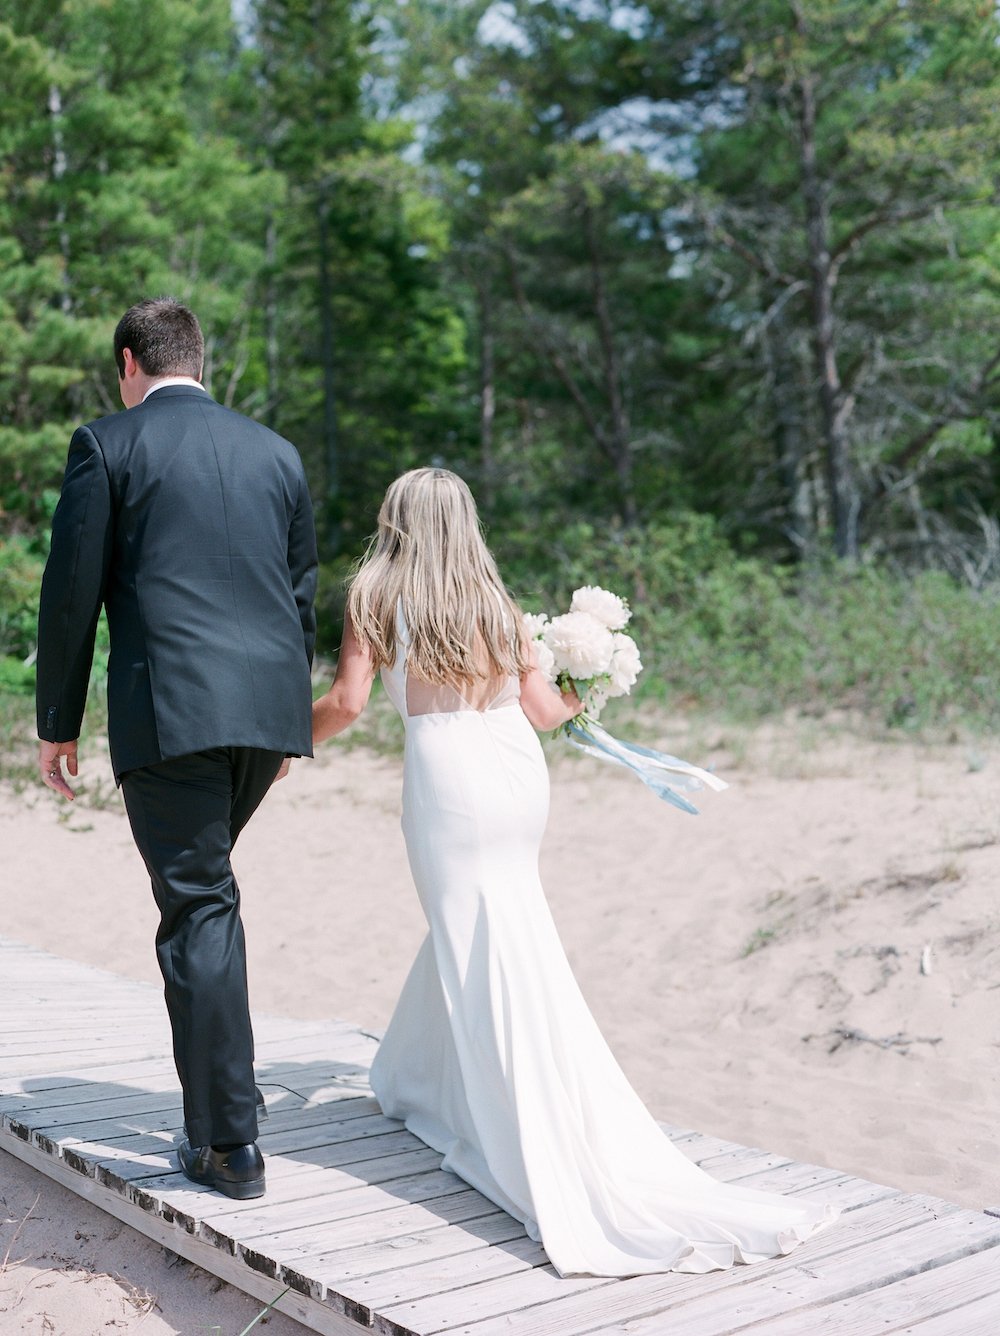 A couple walking off the beach after their wedding